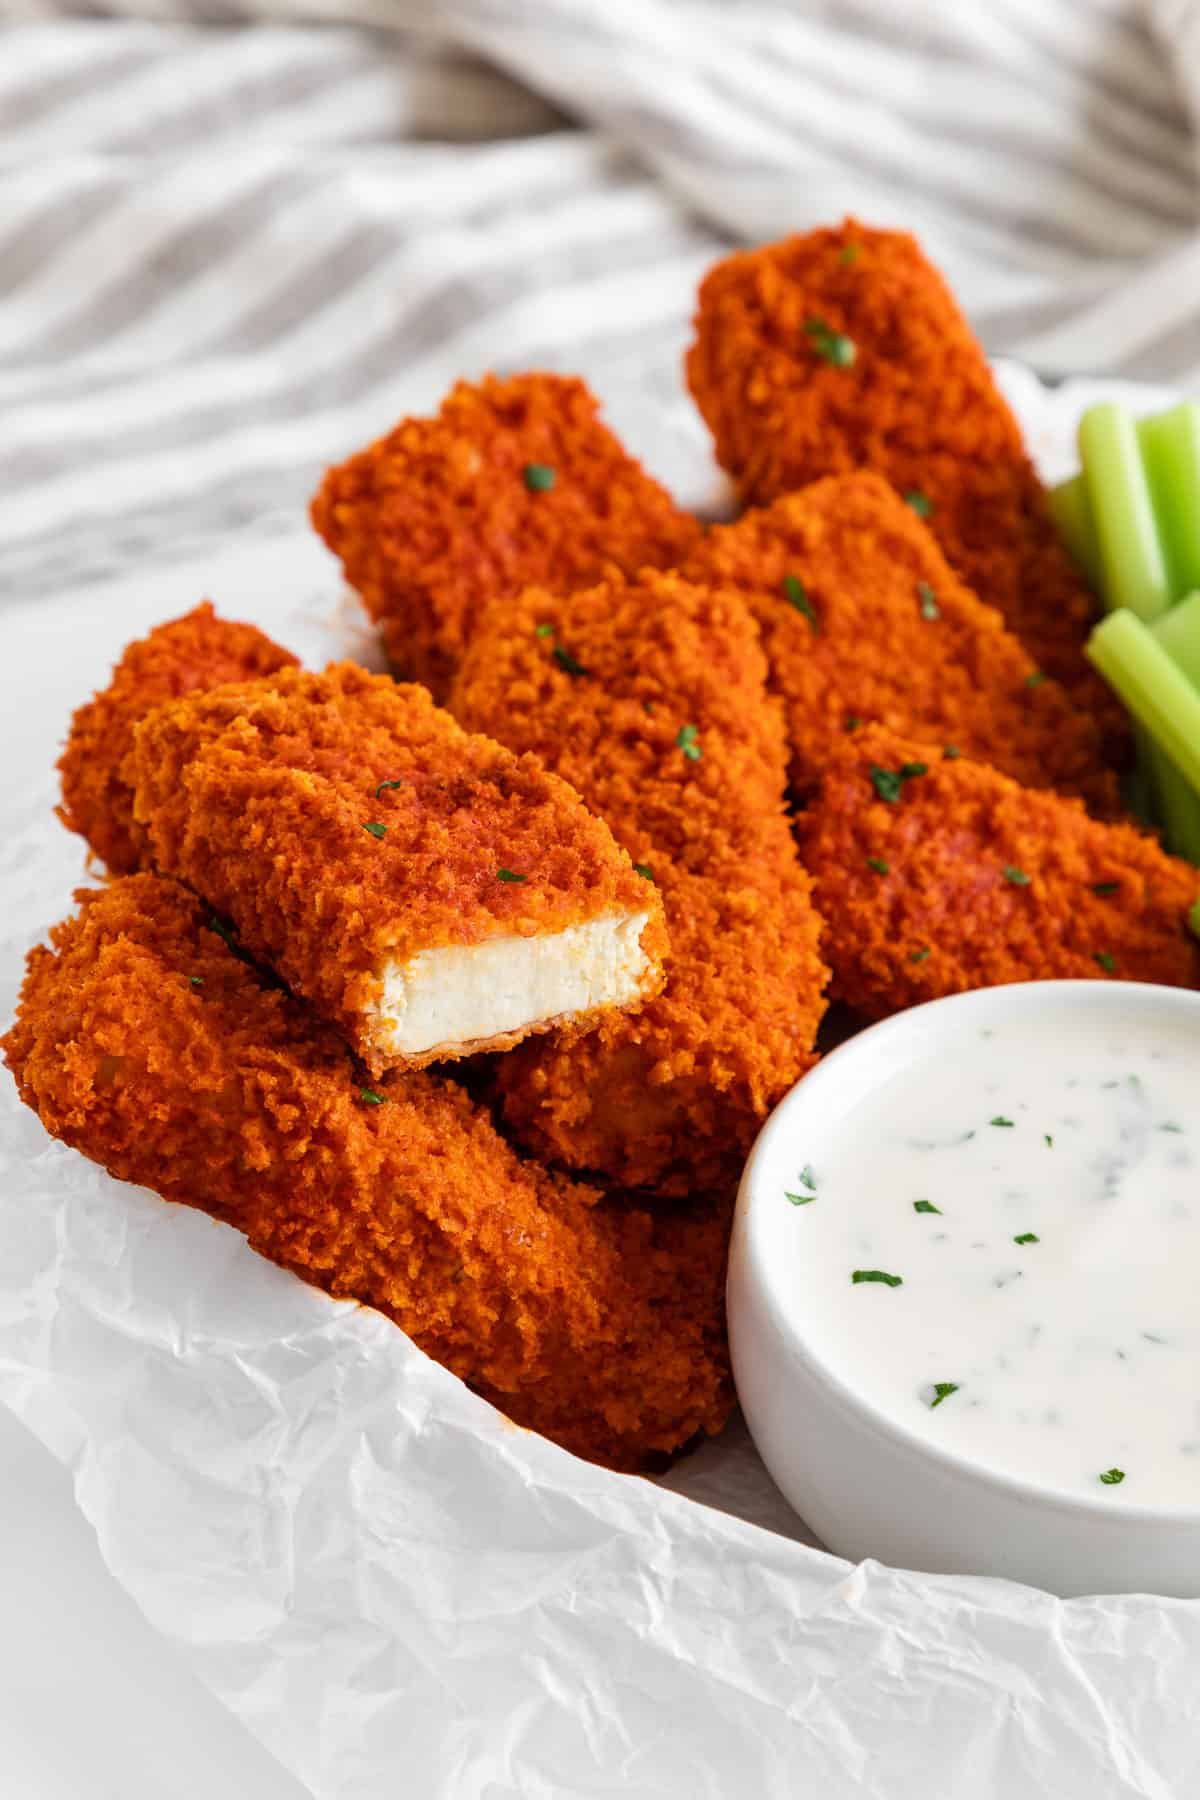 vegan buffalo tofu wings spread on a plate with a bite taken out of one of the wings